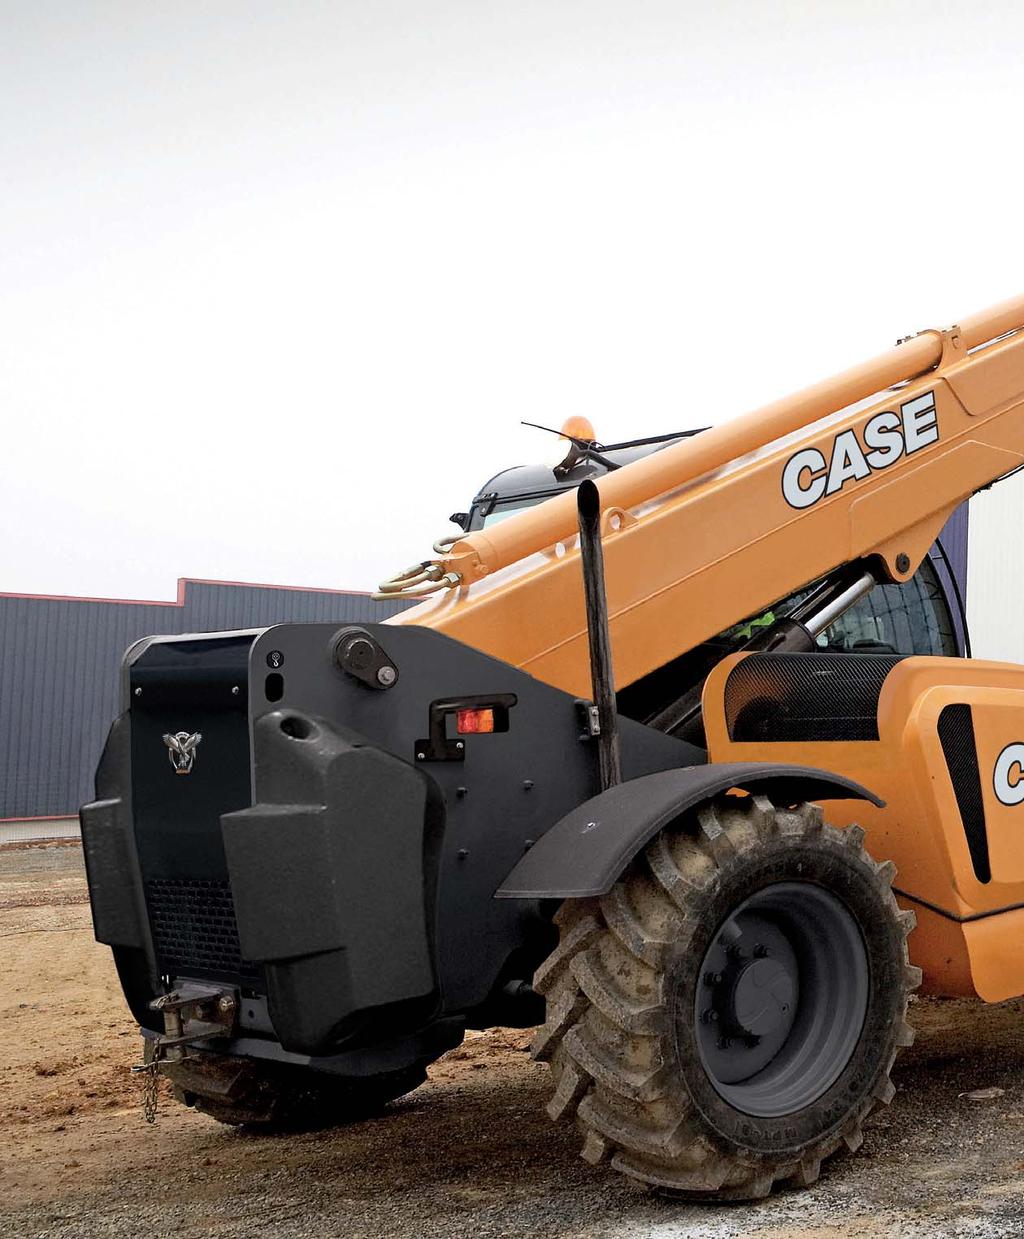 TELESCOPIC HANDLERS Secure base Case TX telescopic handlers offer ipressive stability through the cobination of a long wheelbase, low boo pivot point and optiised counterweight. Total stability.